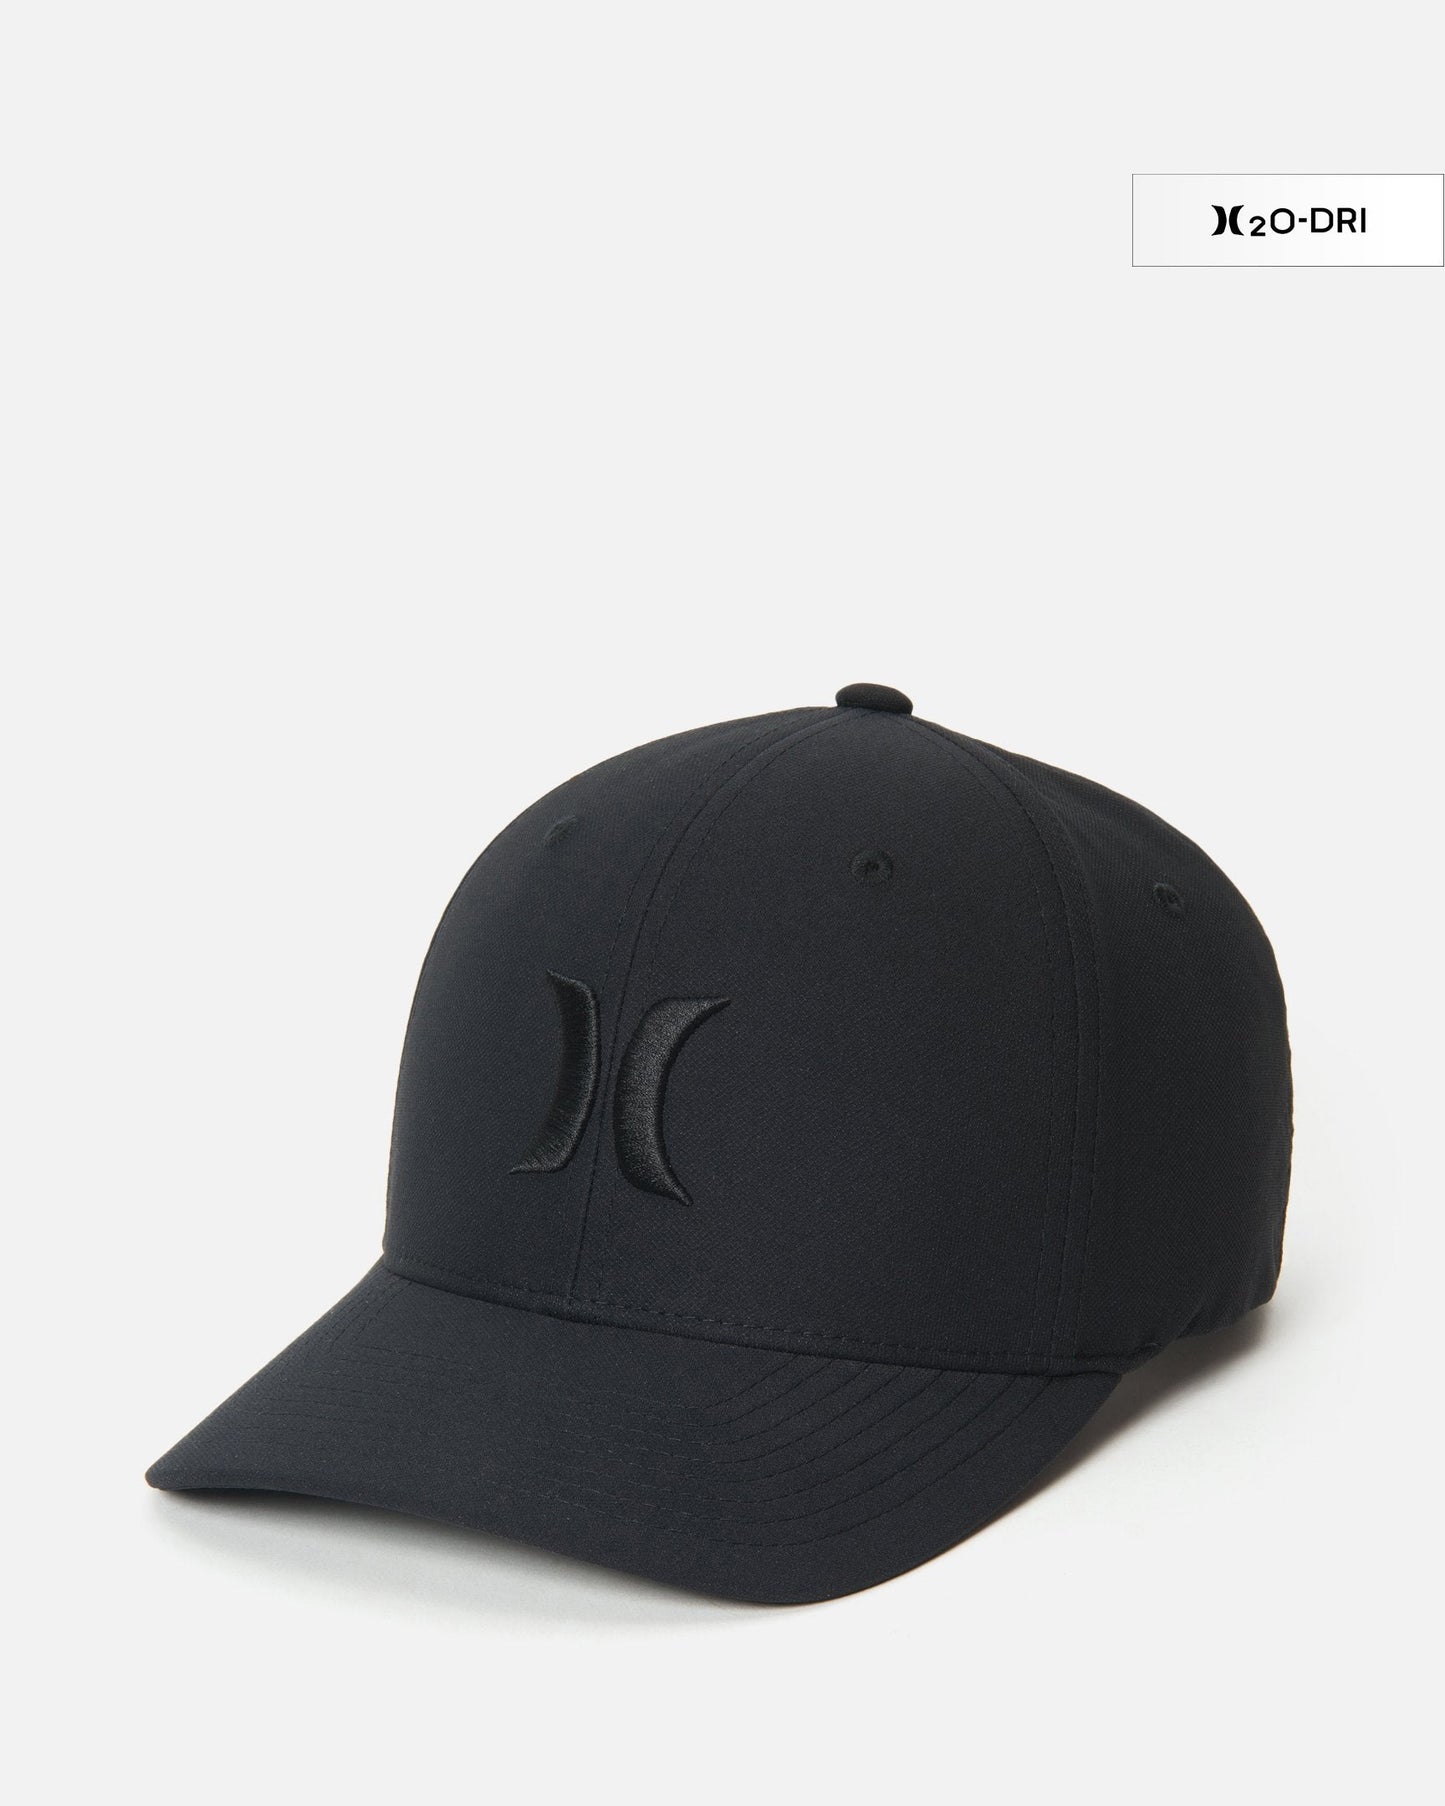 Hurley H20 DRI One And Only Hat